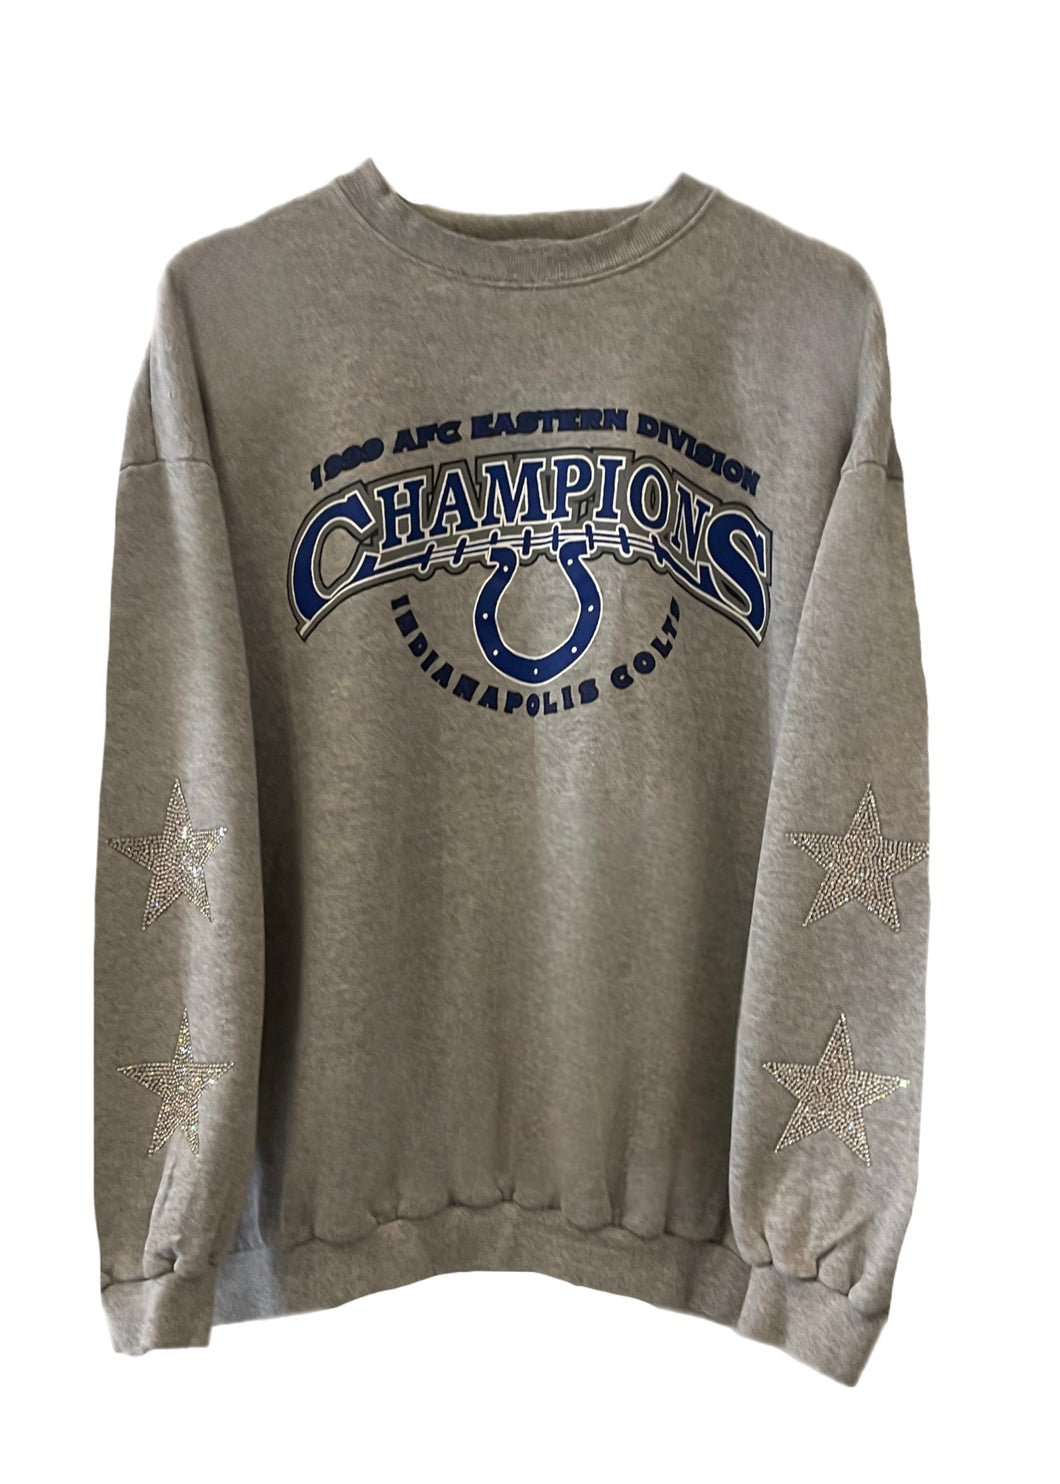 Indianapolis Colts, NFL One of a KIND Vintage Sweatshirt with Crystal Star Design, Custom Number